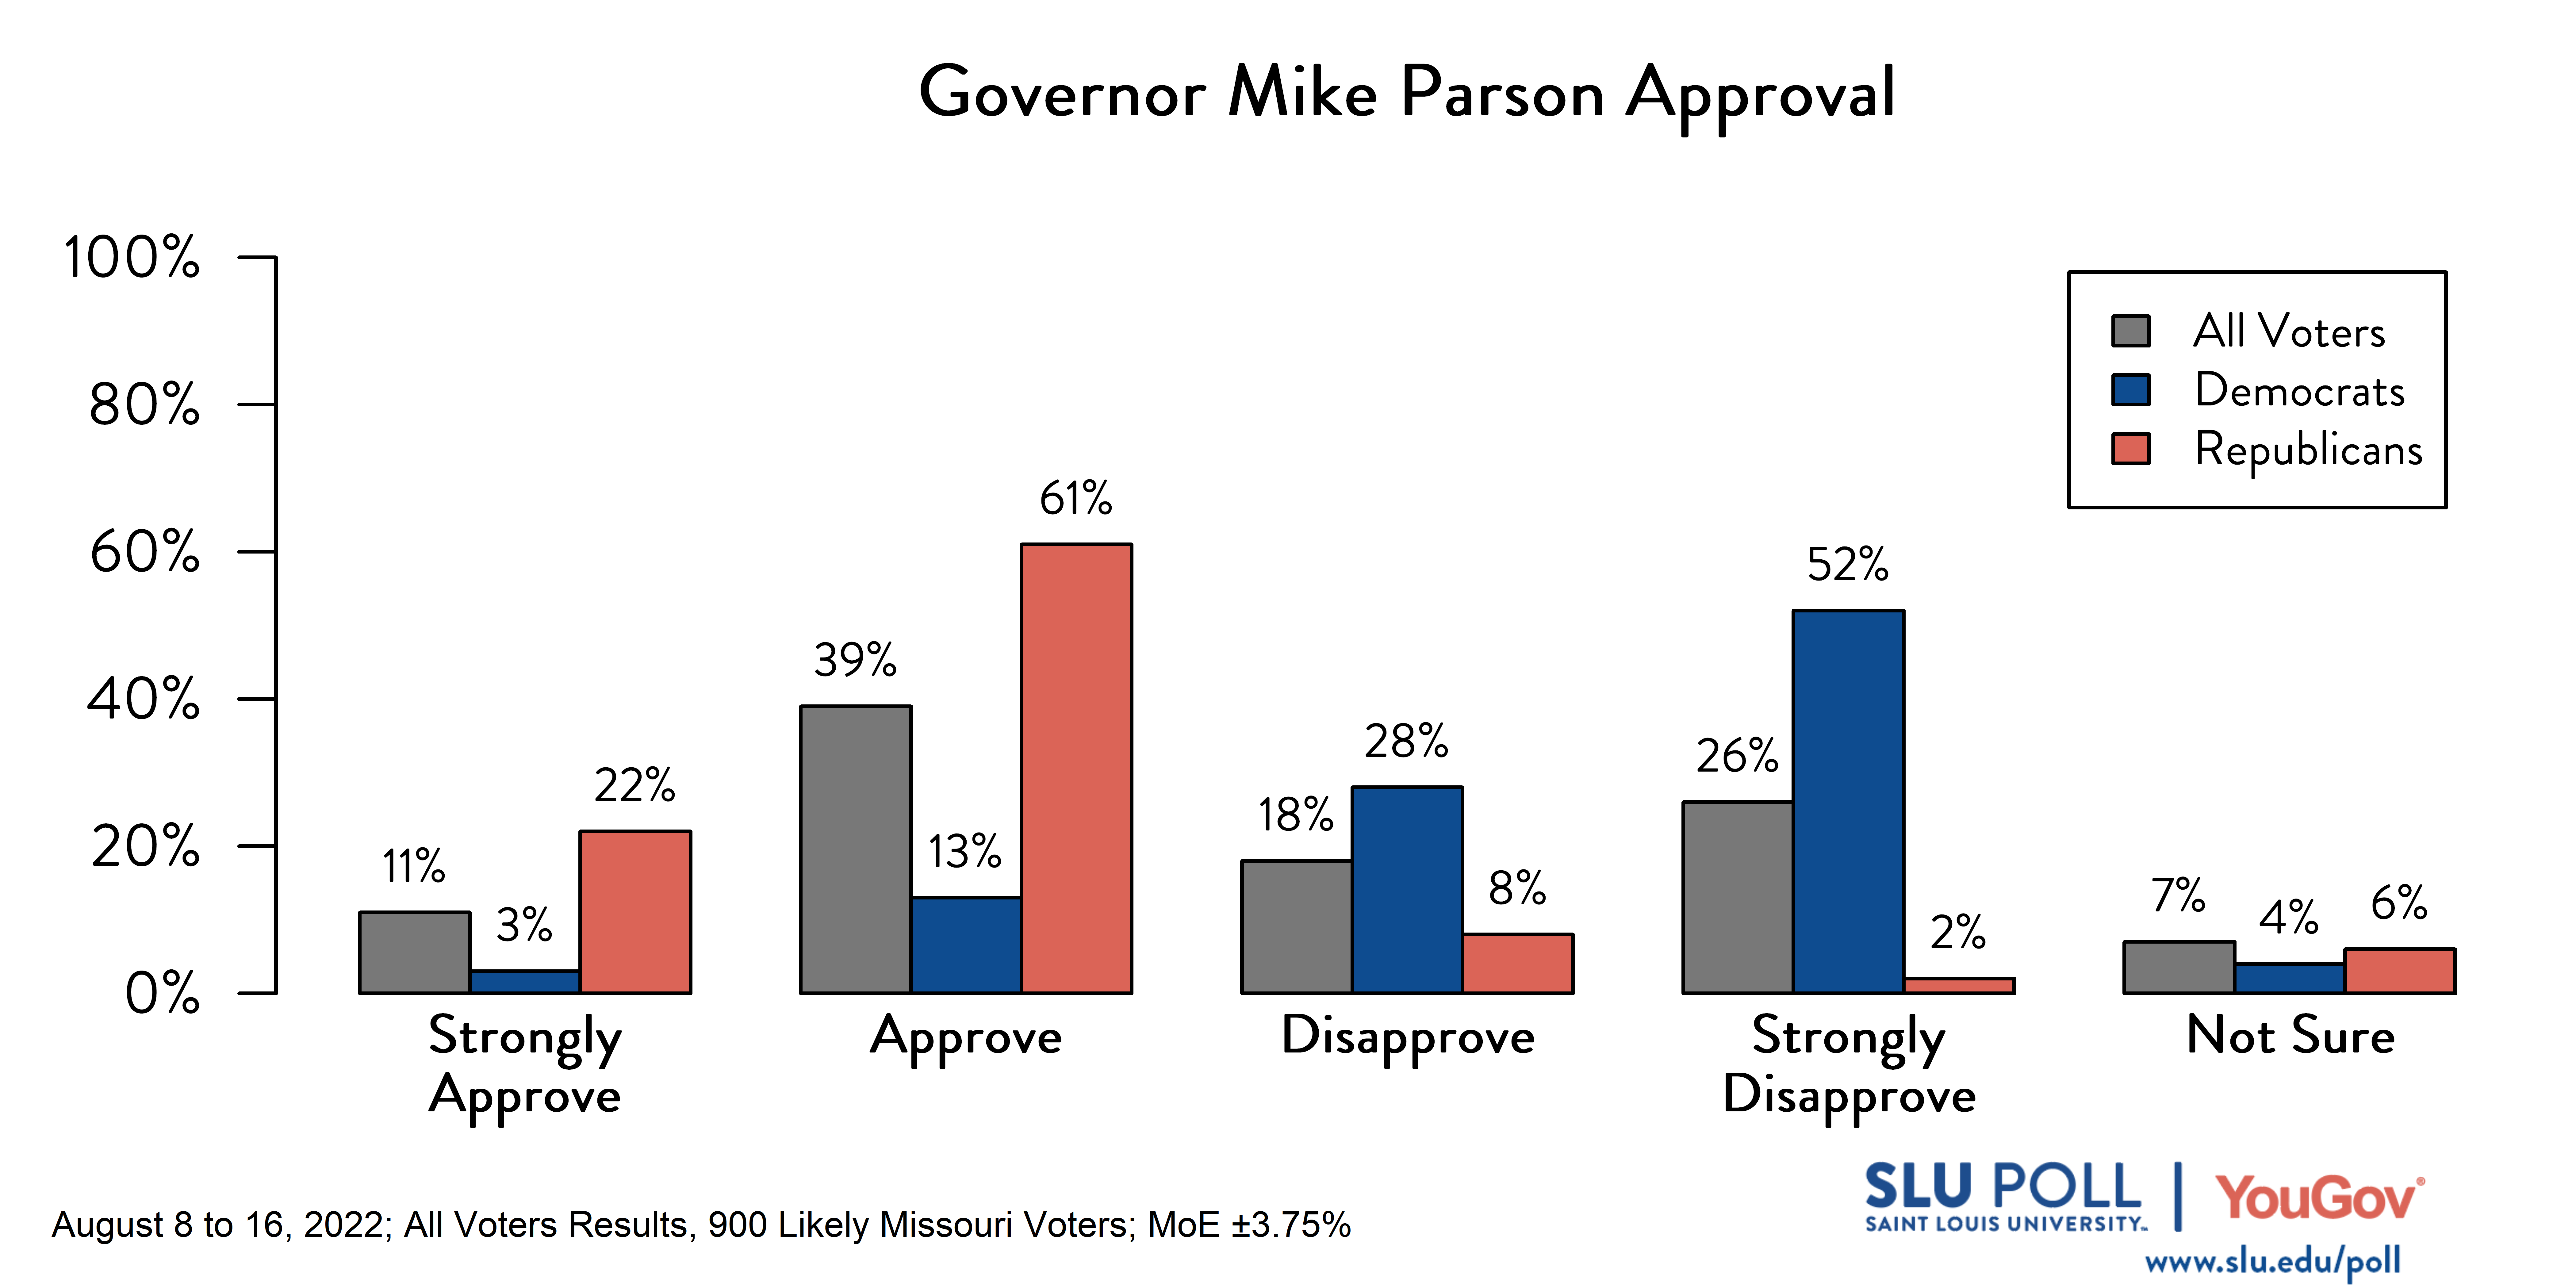 Likely voters' responses to 'Do you approve or disapprove of the way each is doing their job: Governor Mike Parson?': 11% Strongly approve, 39% Approve, 18% Disapprove, 26% Strongly disapprove, and 7% Not sure. Democratic voters' responses: ' 3% Strongly approve, 13% Approve, 28% Disapprove, 52% Strongly disapprove, and 4% Not sure. Republican voters' responses: 22% Strongly approve, 61% Approve, 8% Disapprove, 2% Strongly disapprove, and 6% Not sure. 